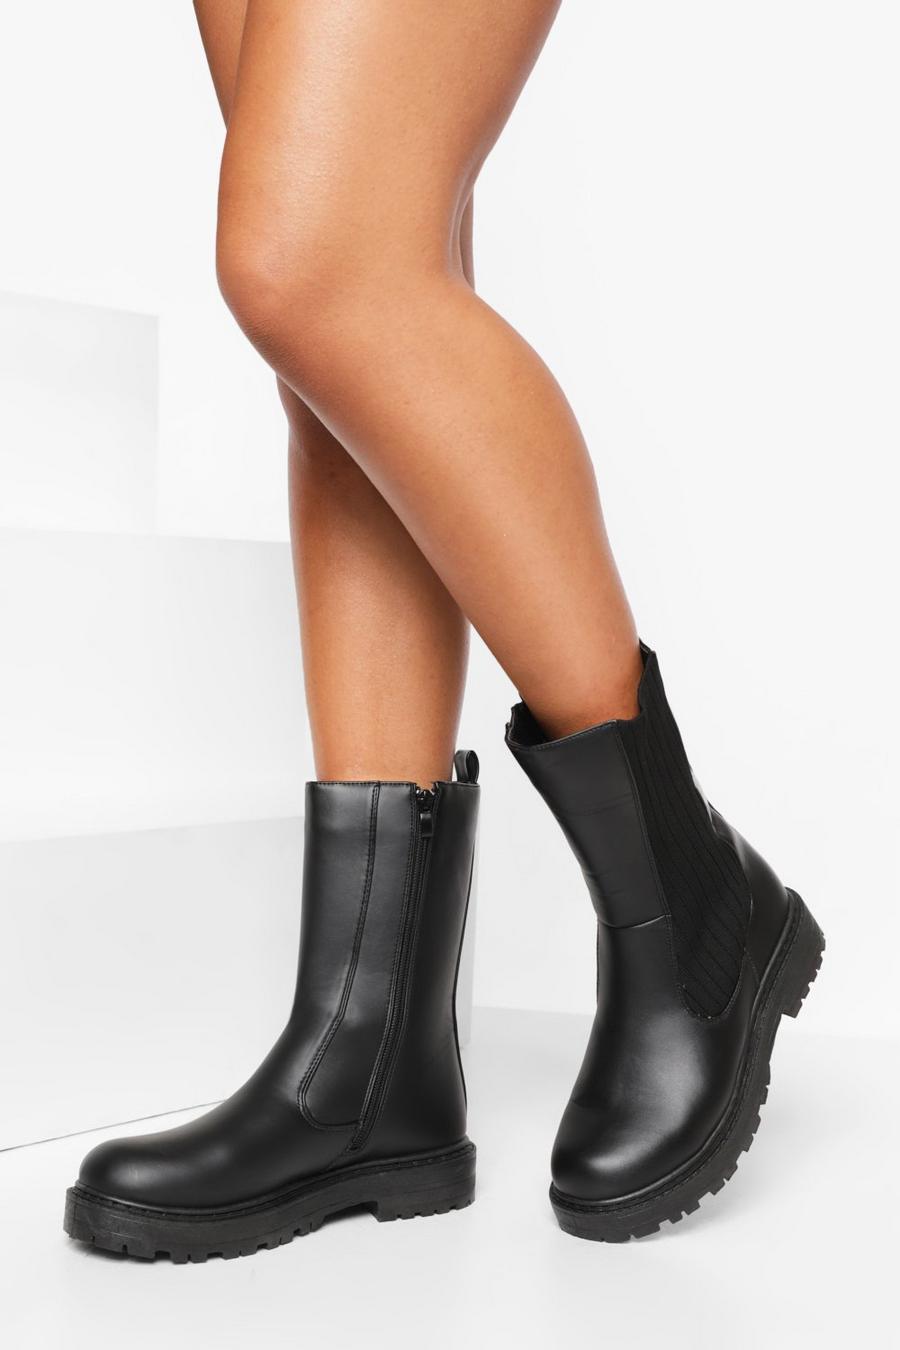 Black Wide Fit Calf High Chelsea Boots